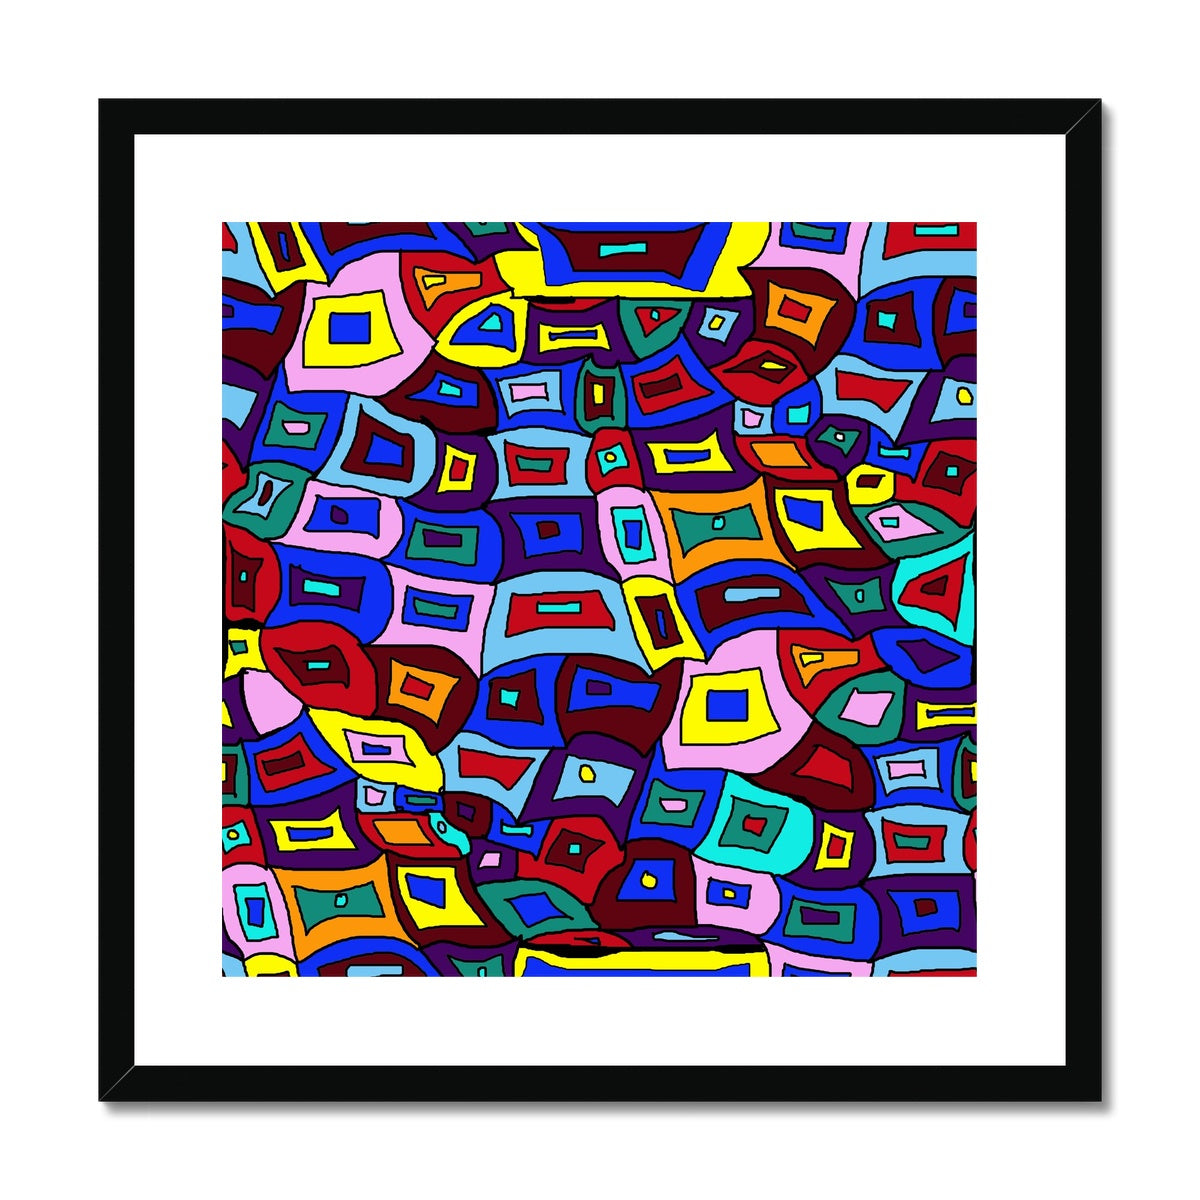 Wavy Square Pattern Framed & Mounted Print